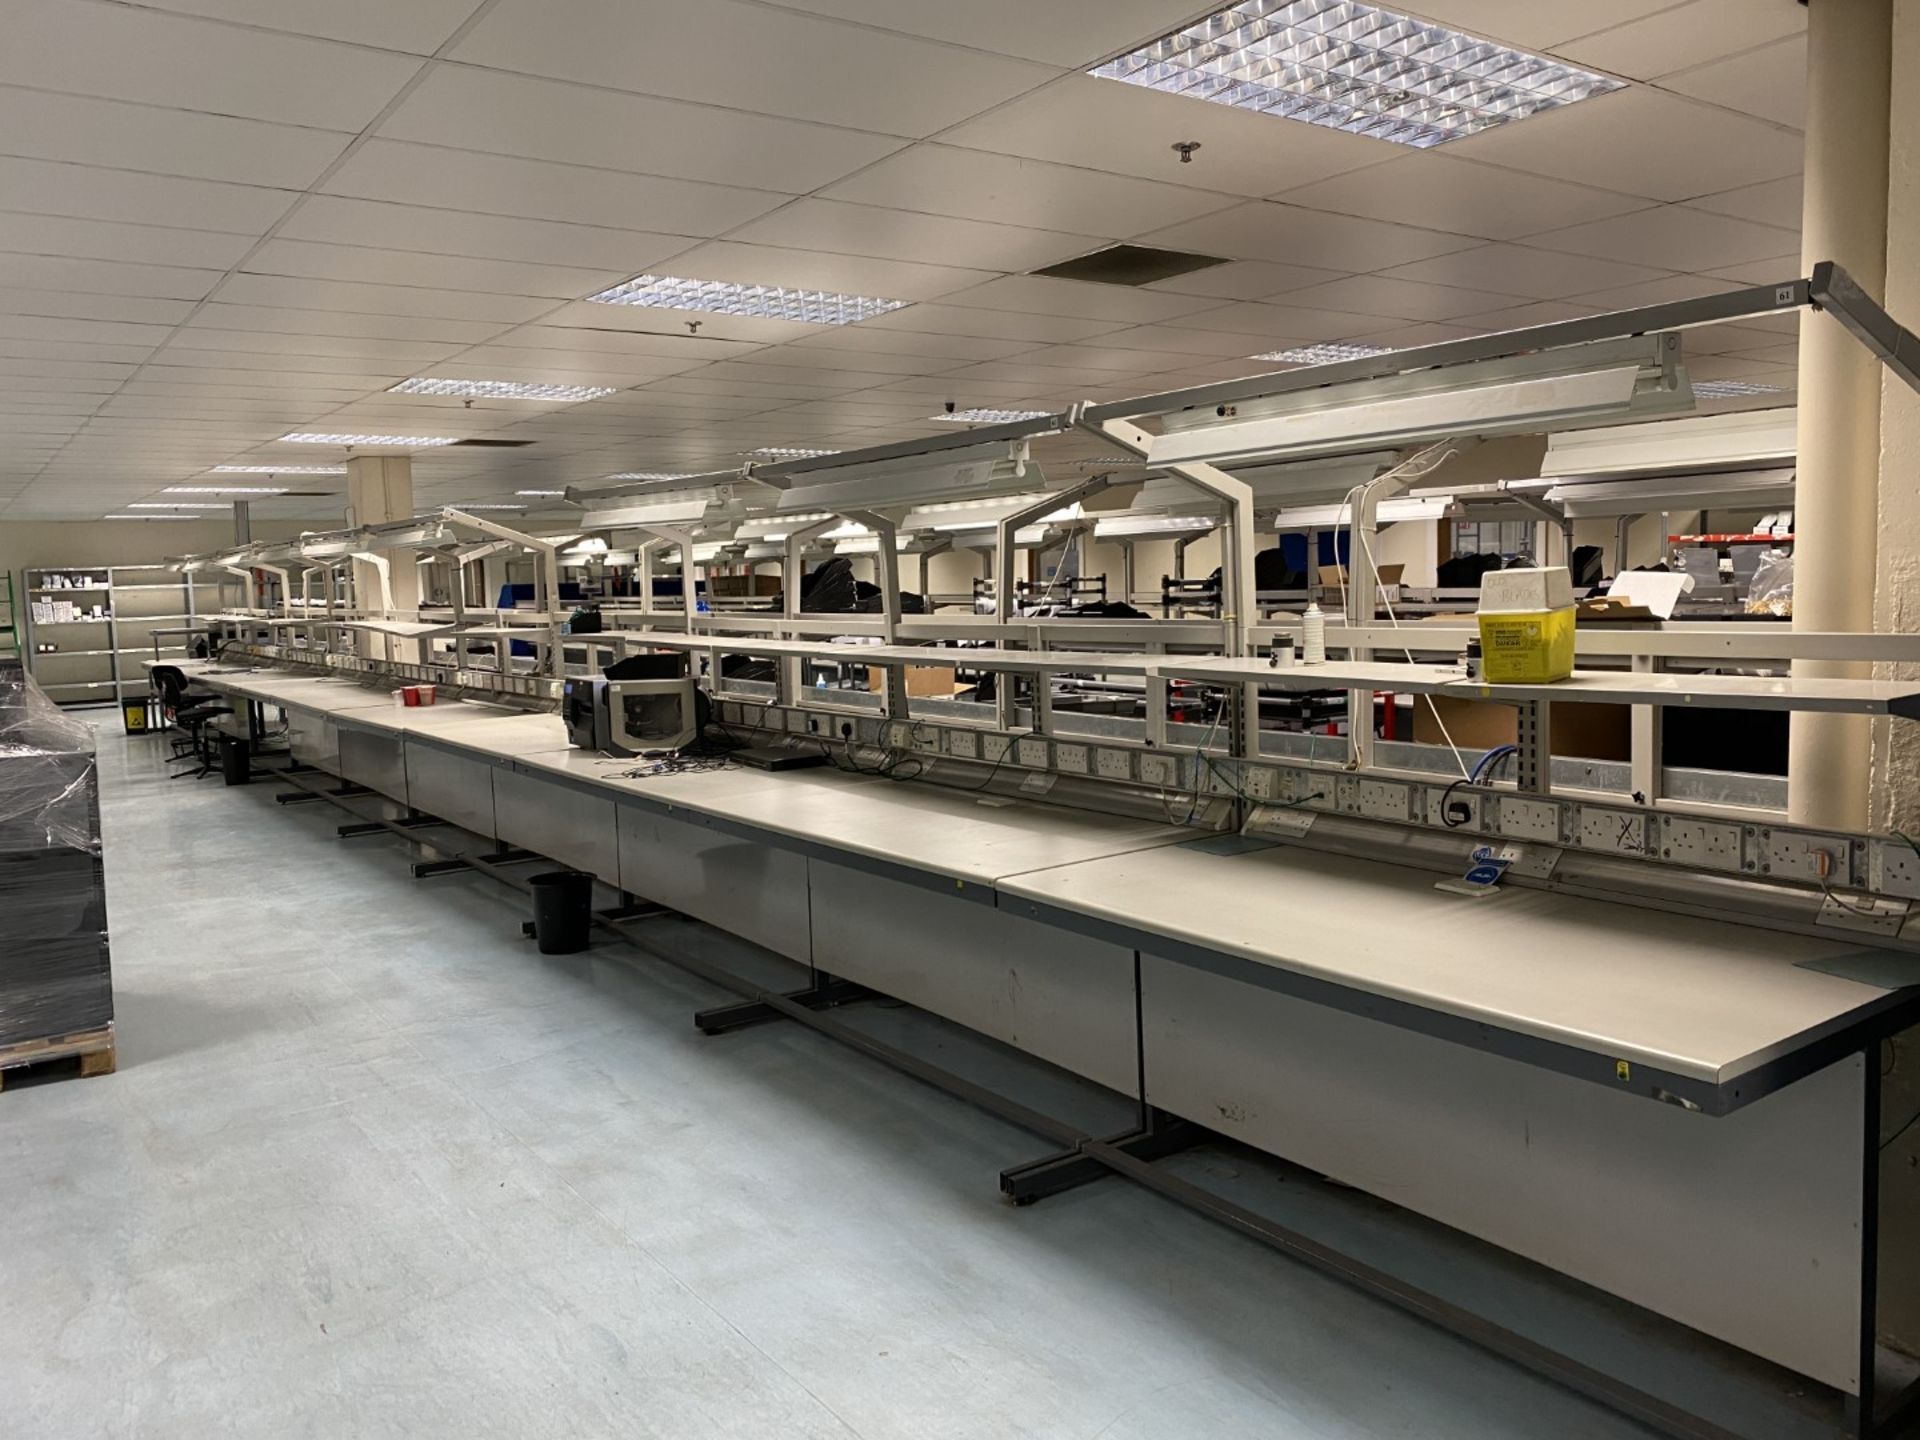 5x Work benches with trunking power sockets, shelving and overhead lighting, grey metal frame